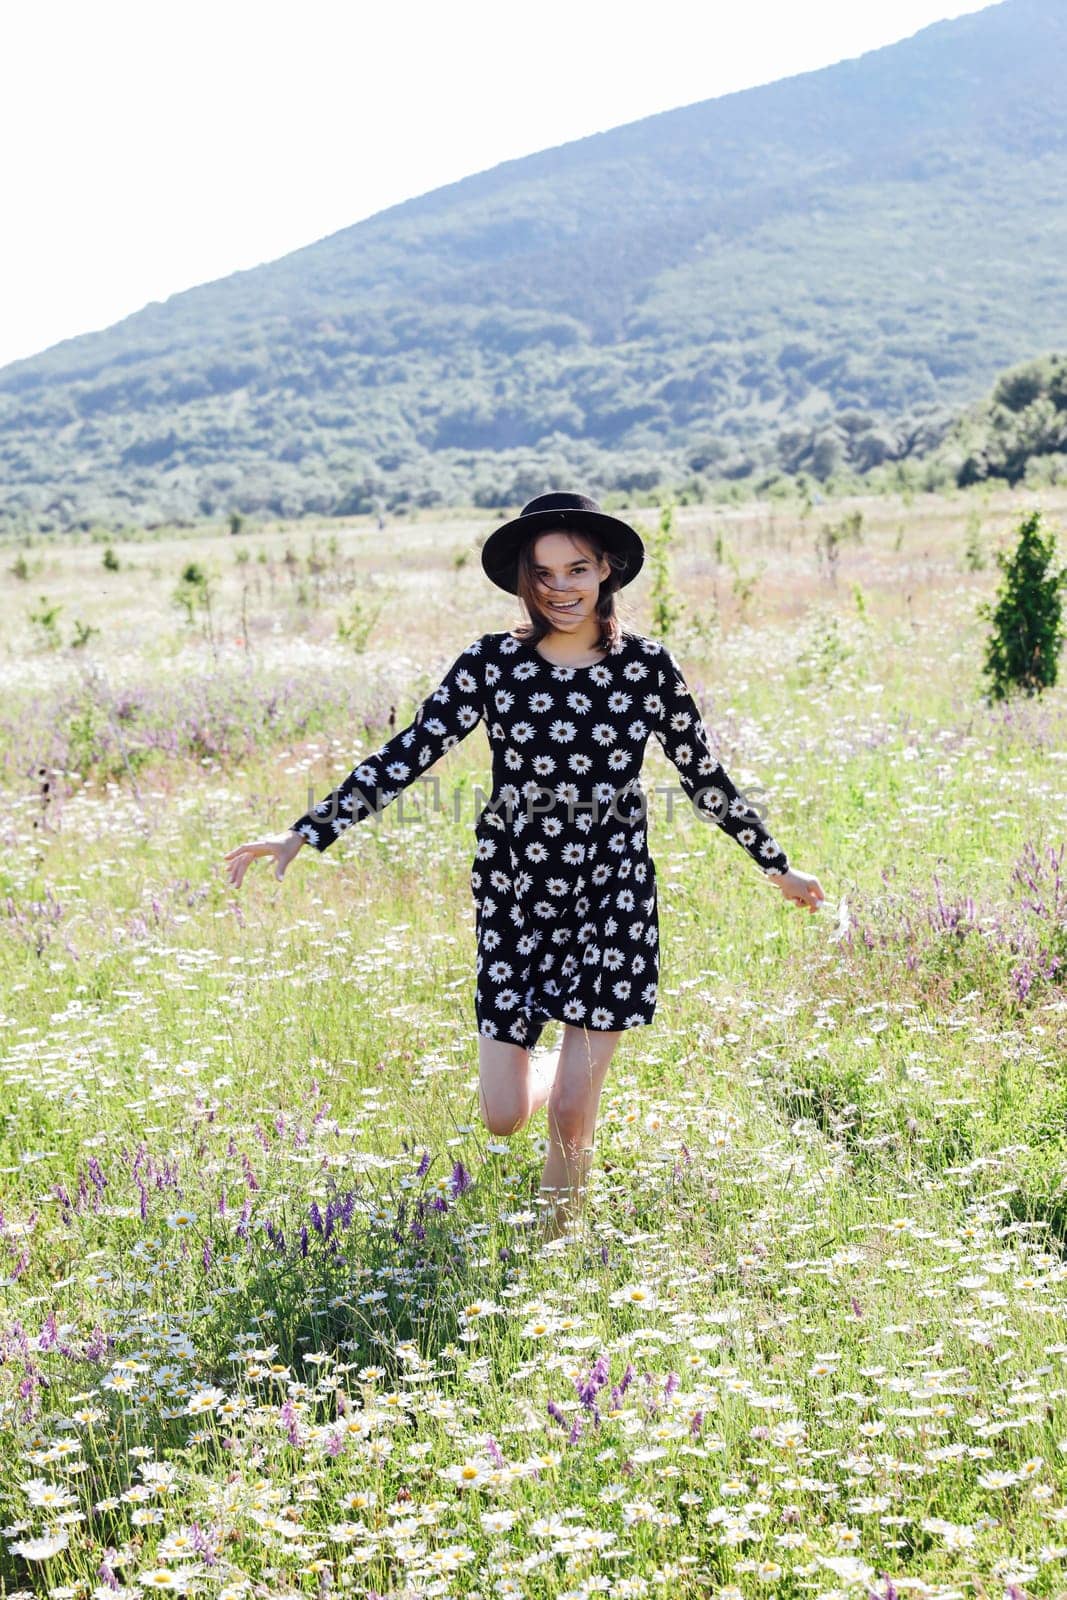 woman in a hat runs through a field of flowers in nature